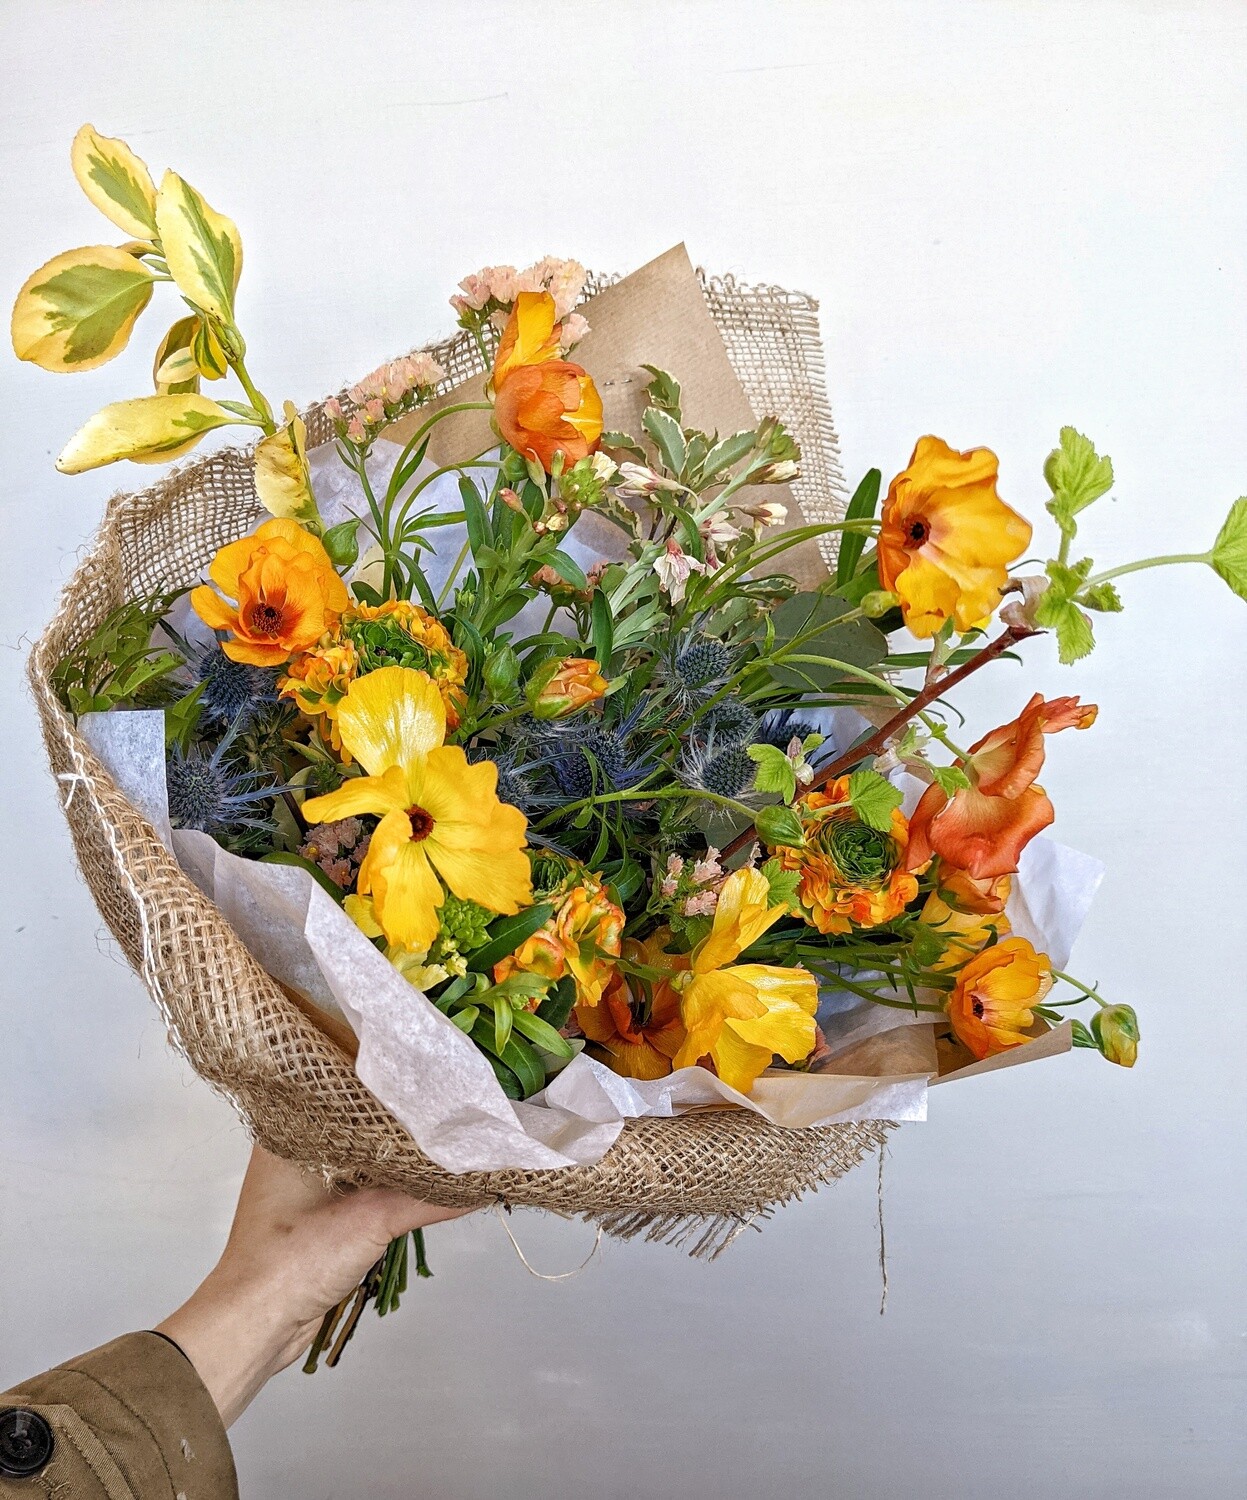 Summer Hand-Tied Bouquet:

Thursday 21st July 6.30PM